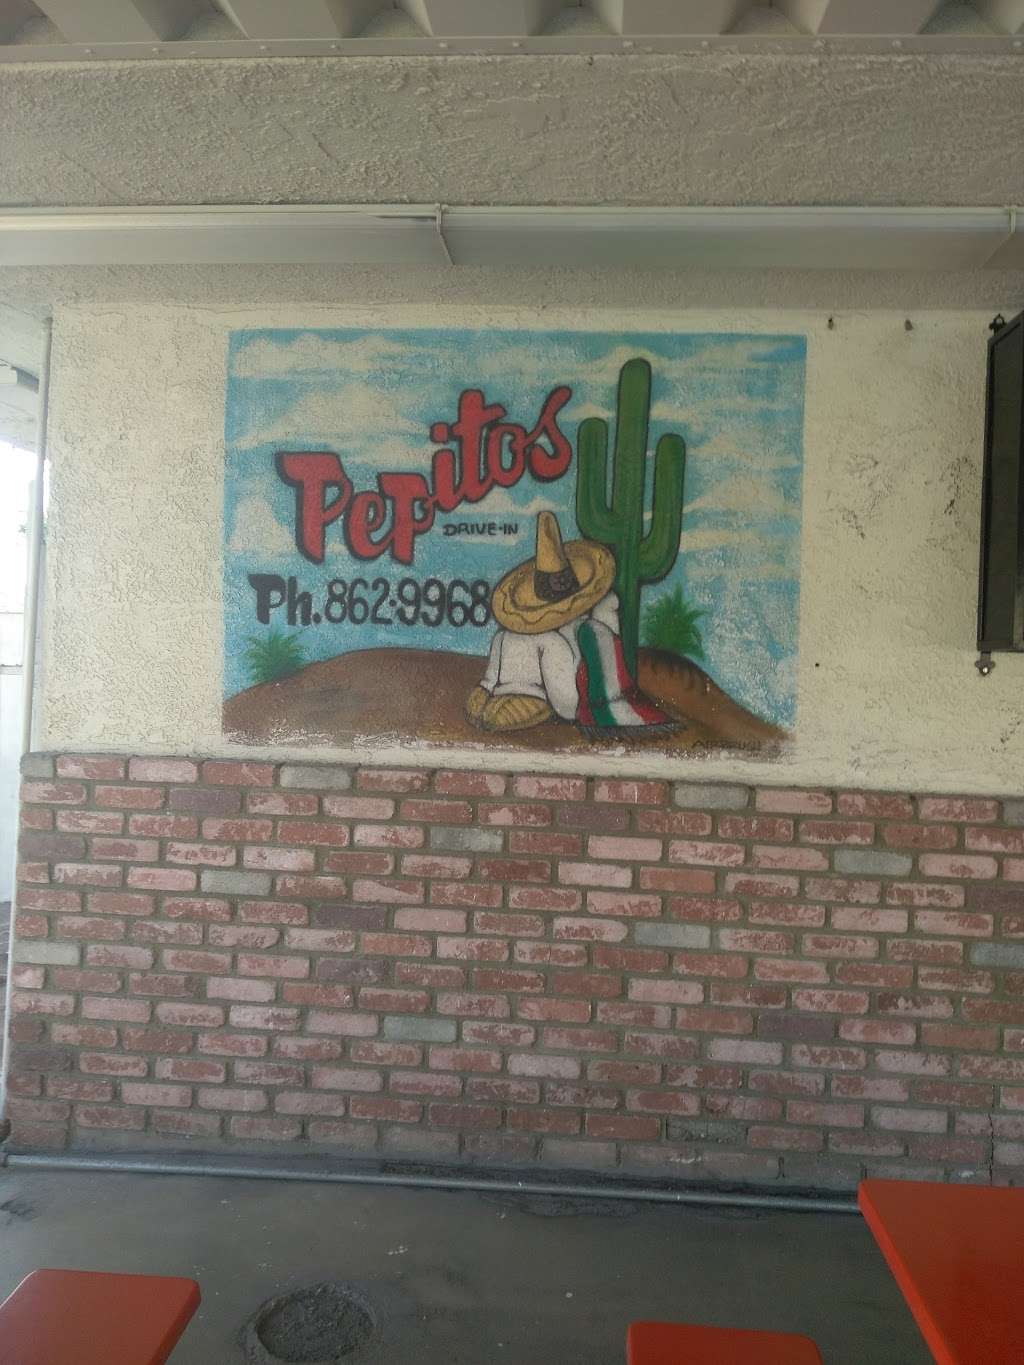 Pepitos Drive In | 26539 Base Line St, Highland, CA 92346 | Phone: (909) 862-9968